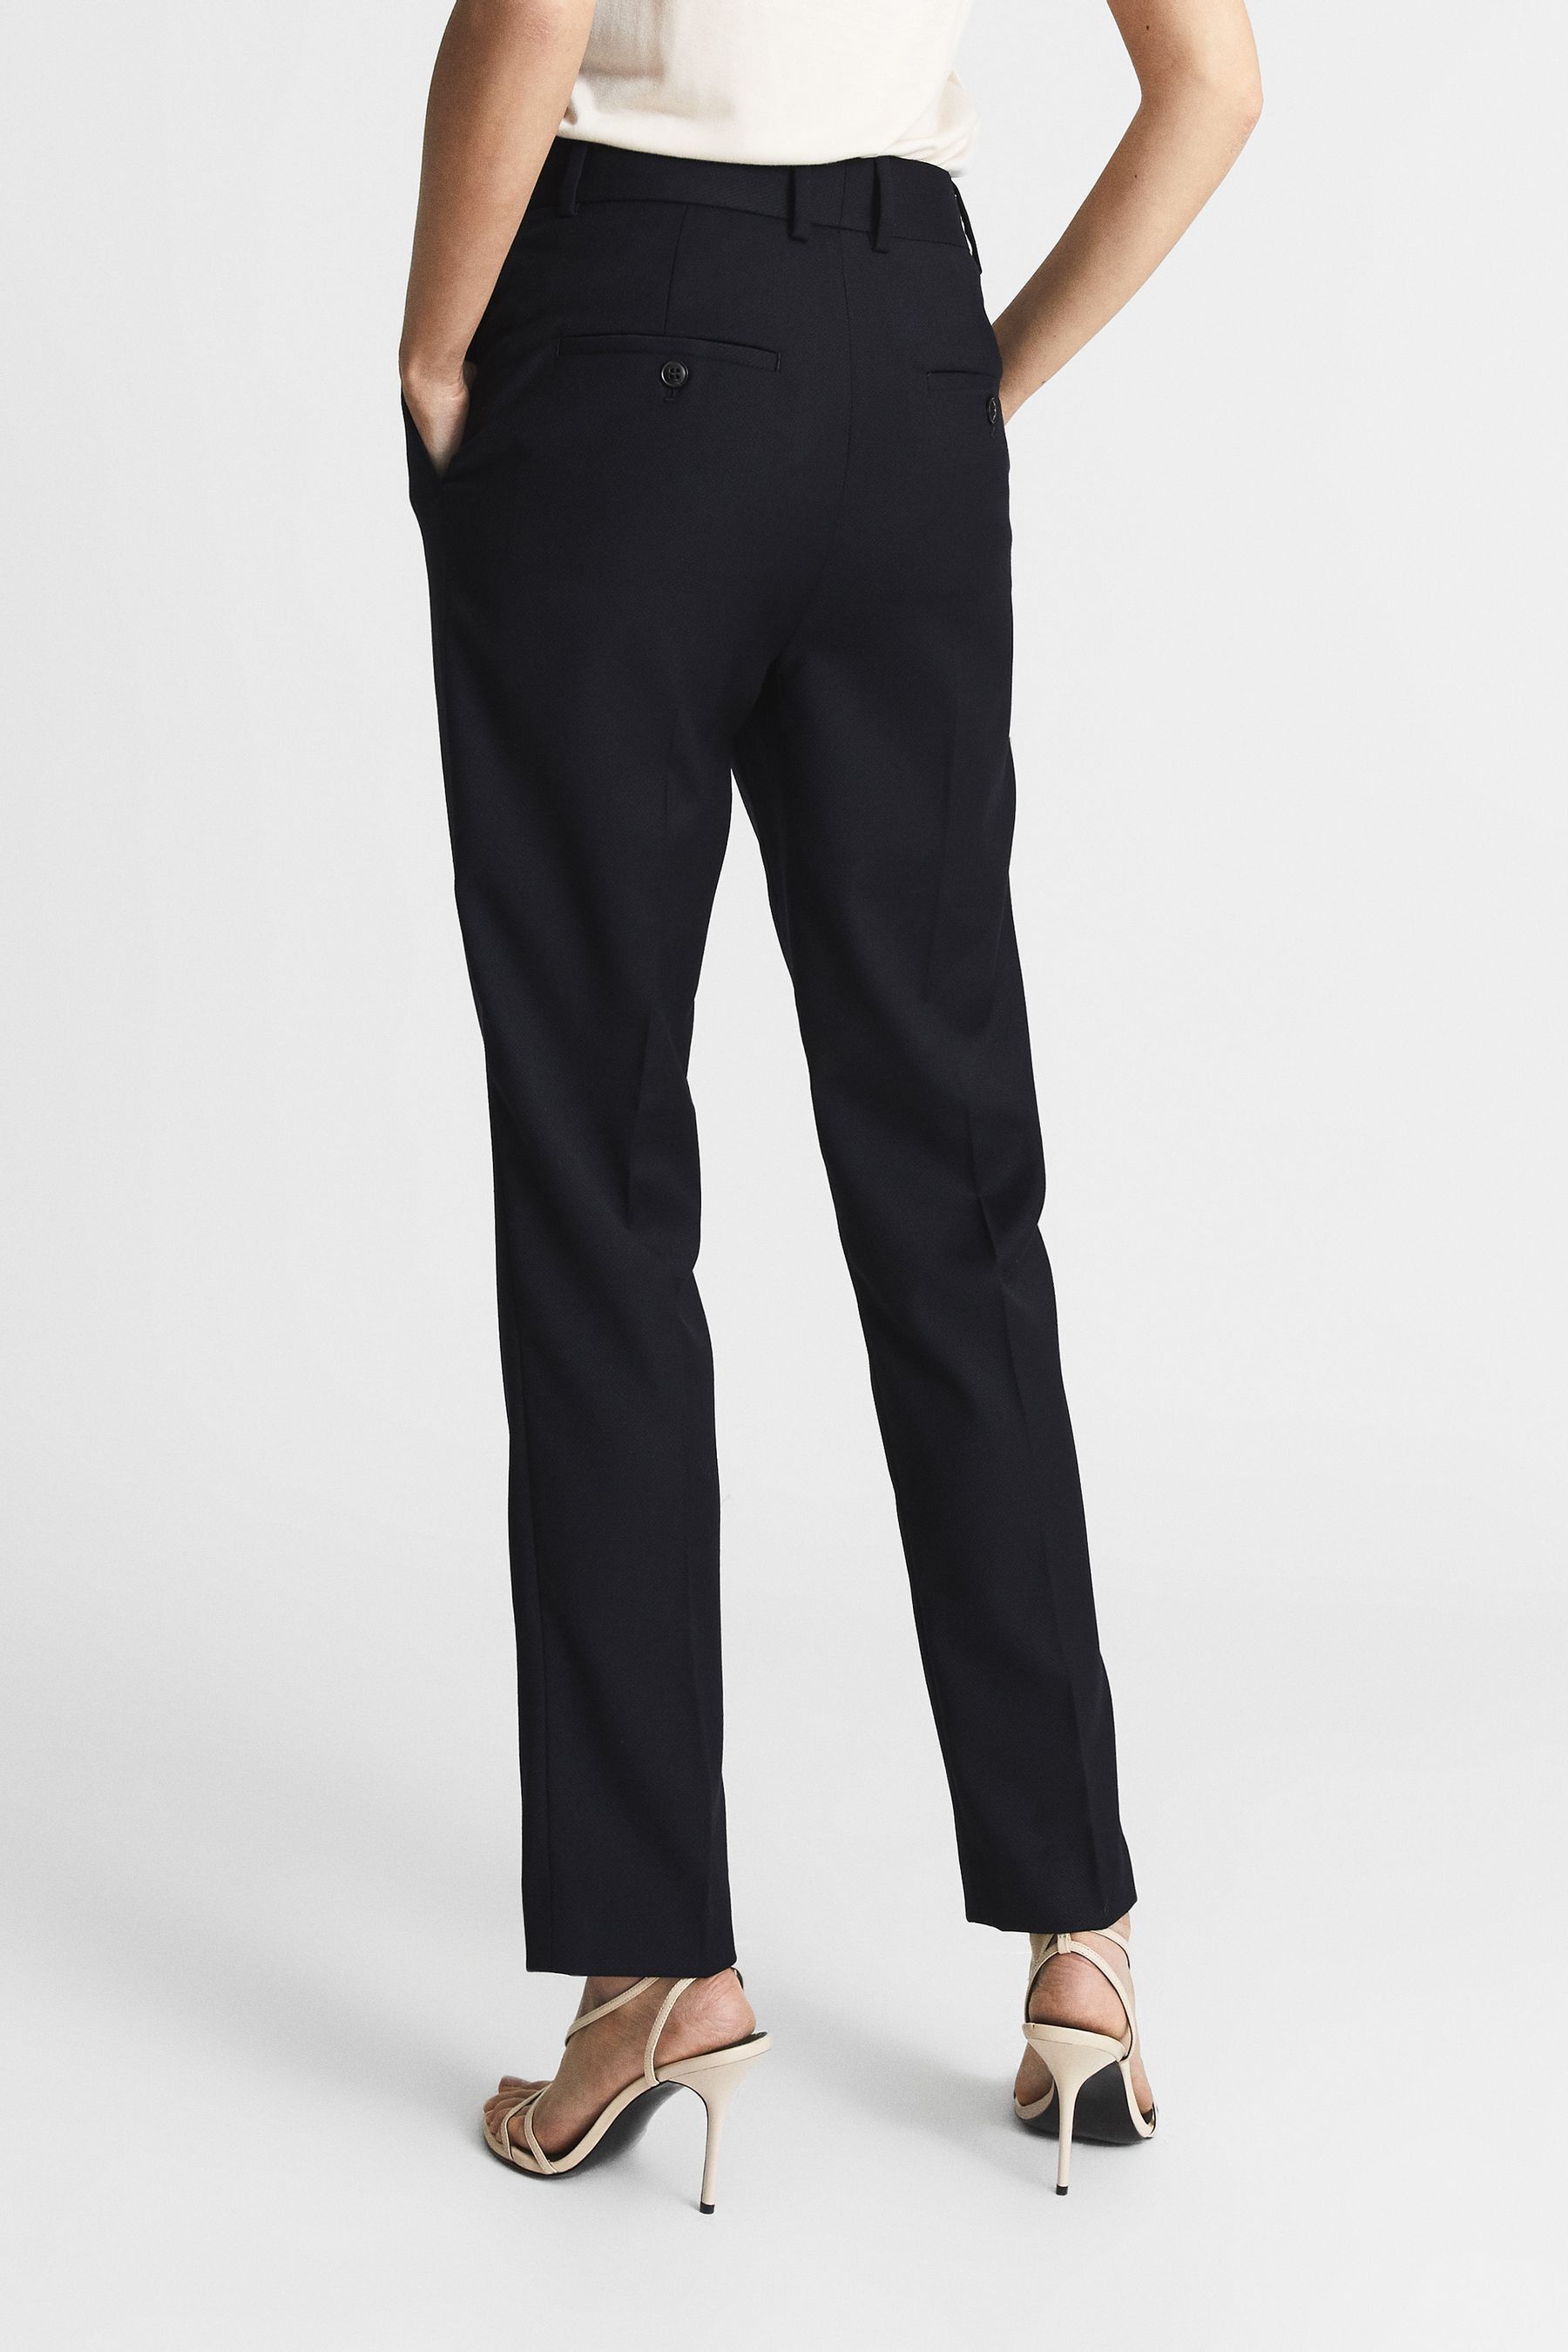 Buy Reiss Haisley Slim Leg Tapered Trousers from the Next UK online shop